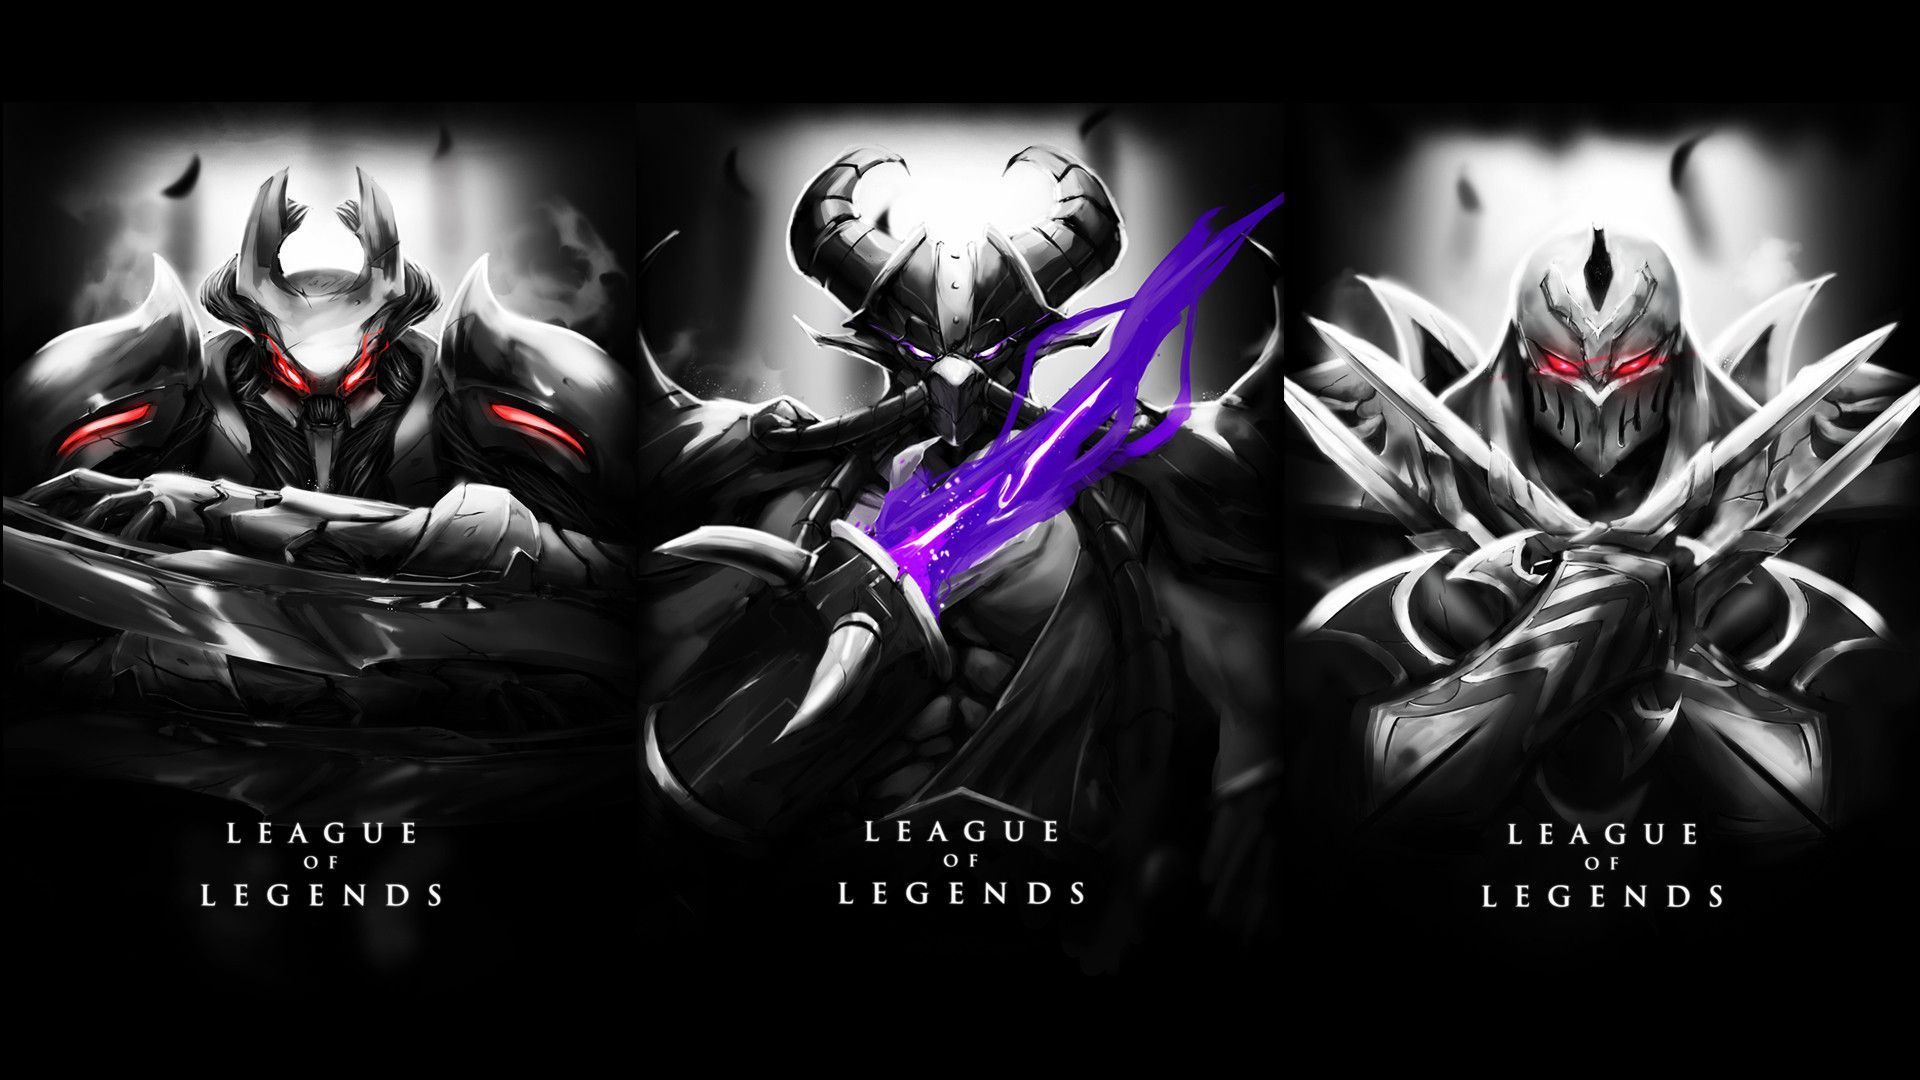 League of Legends (mostly) HD Wallpaper album! (over 300 ...